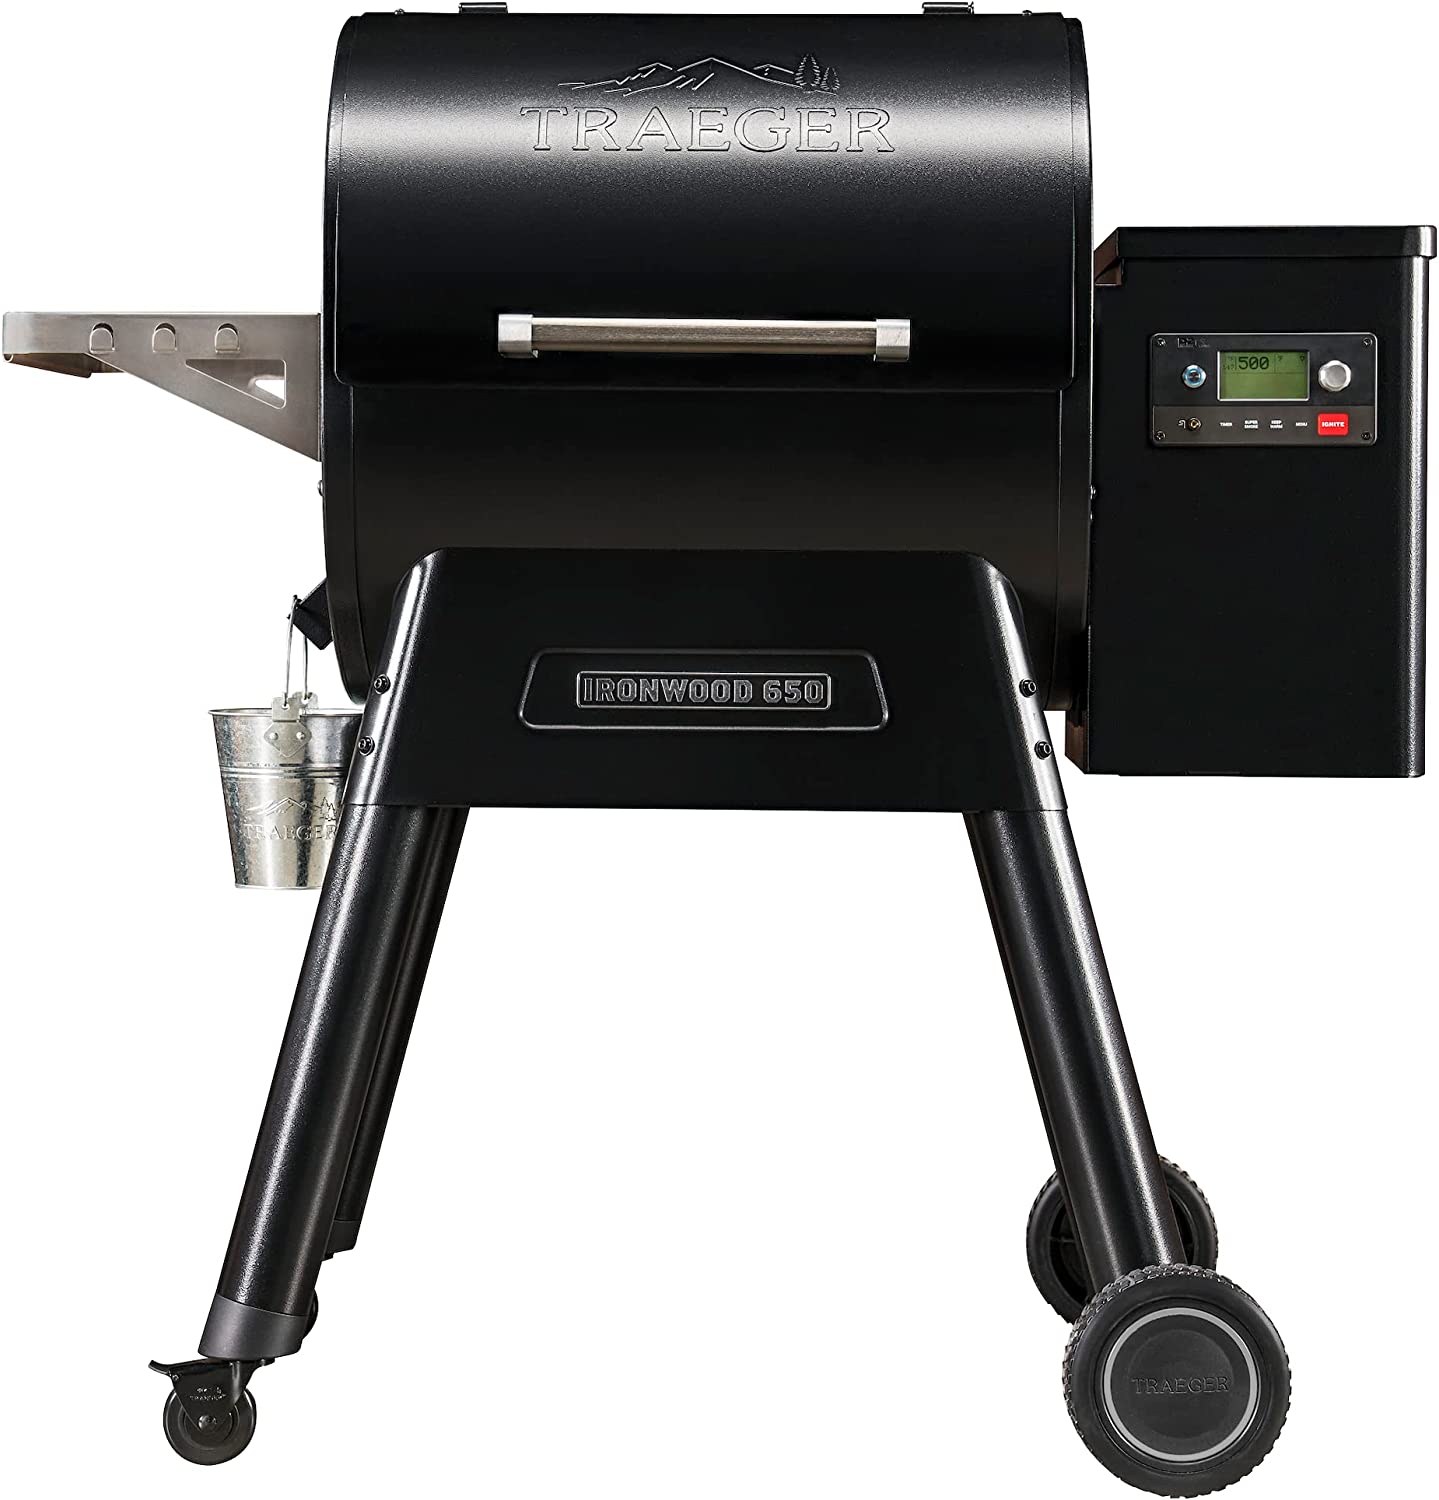 TRAEGER - Barbecue Ironwood 650 - Barbecue à Pellets Ultra Performant - Multifonction 6 en 1 - Connecté